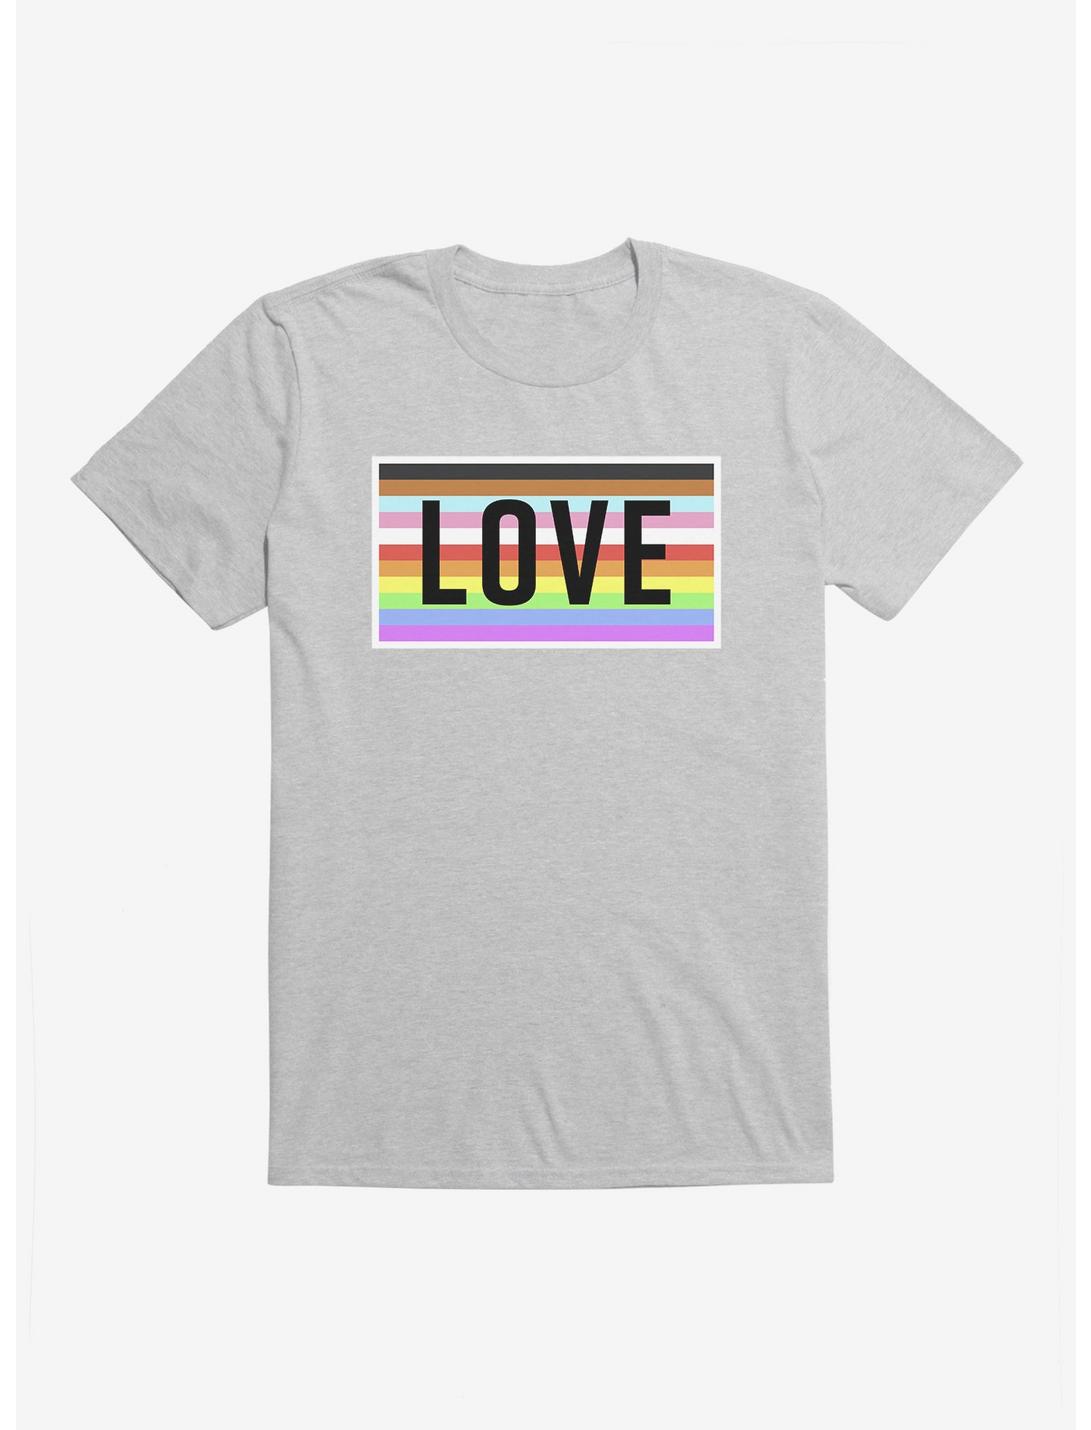 Hot Topic Foundation LOVE T-Shirt, HEATHER GREY, hi-res